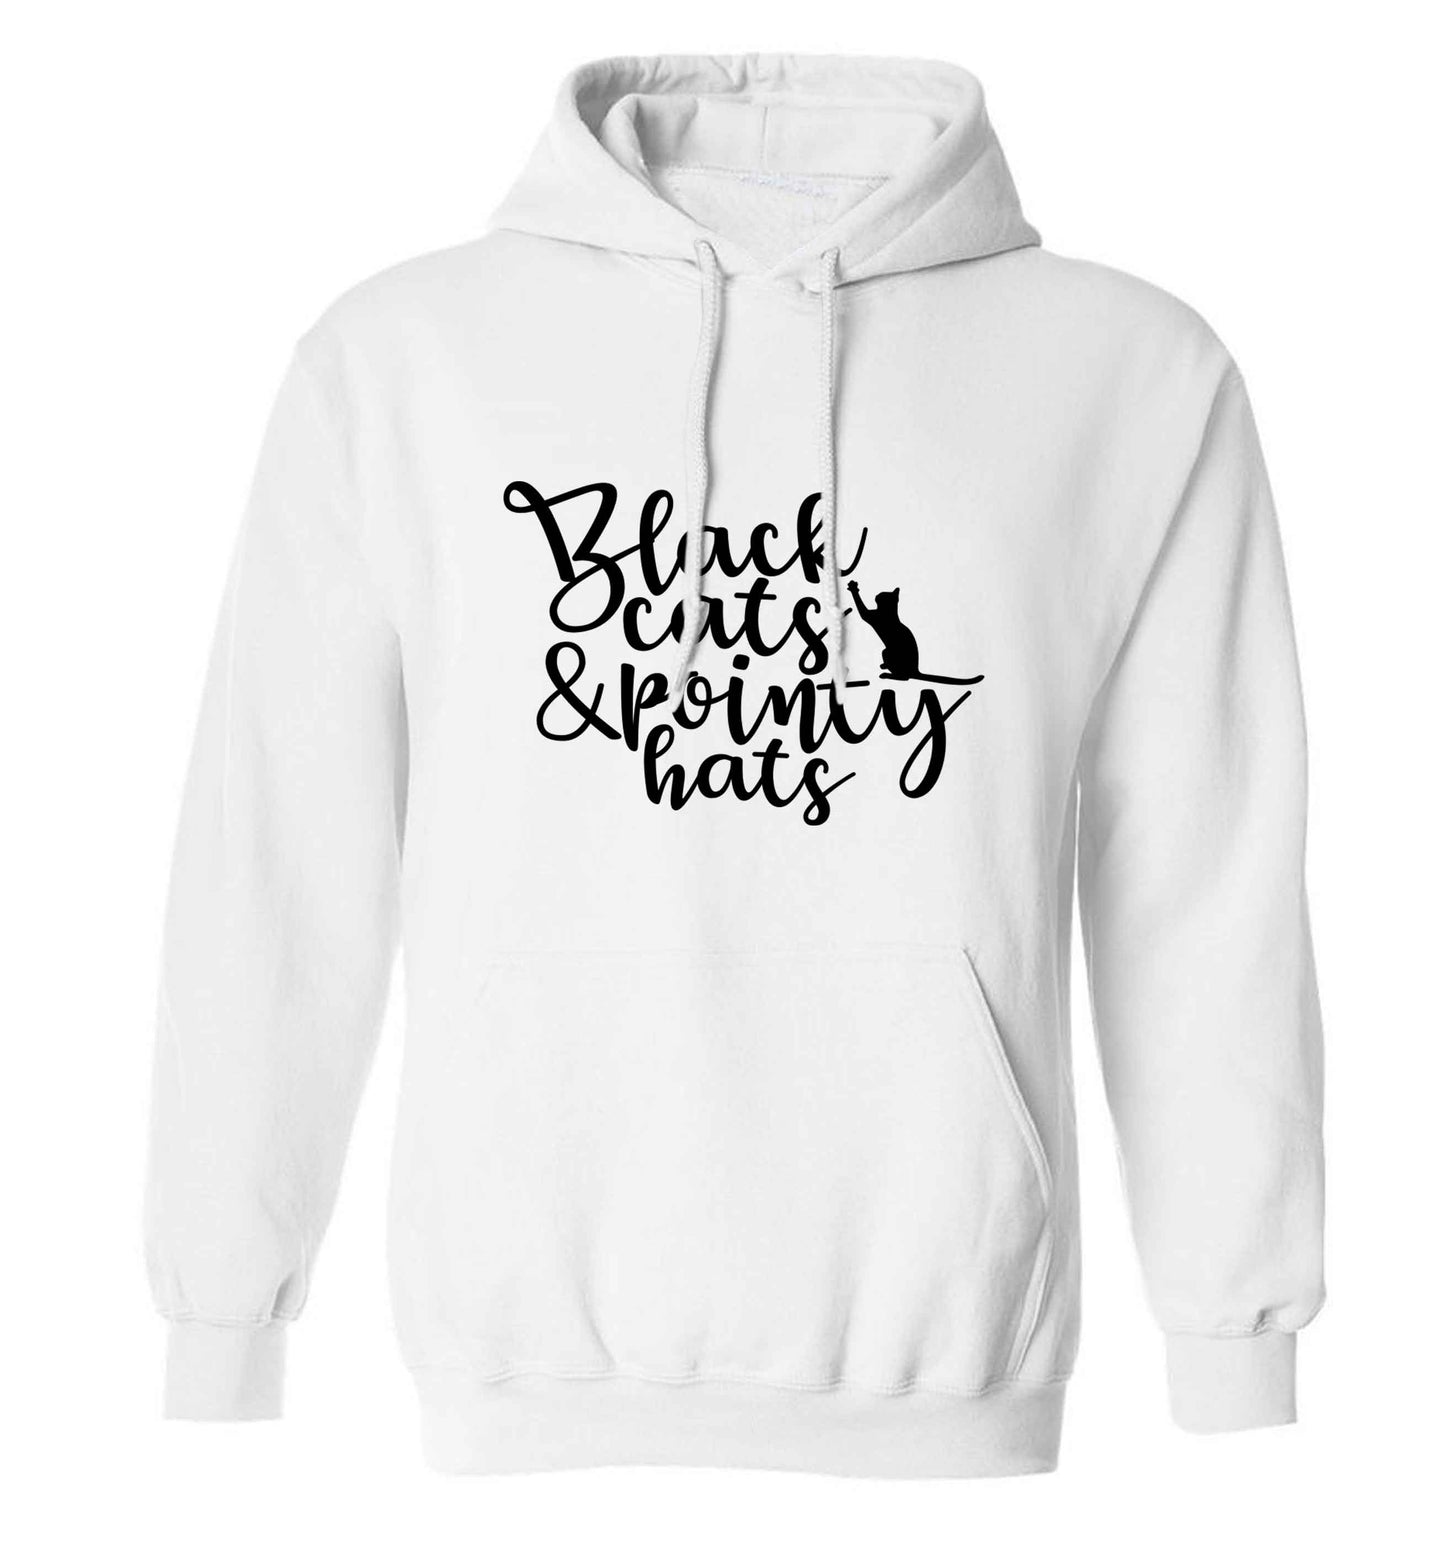 Black cats and pointy hats adults unisex white hoodie 2XL